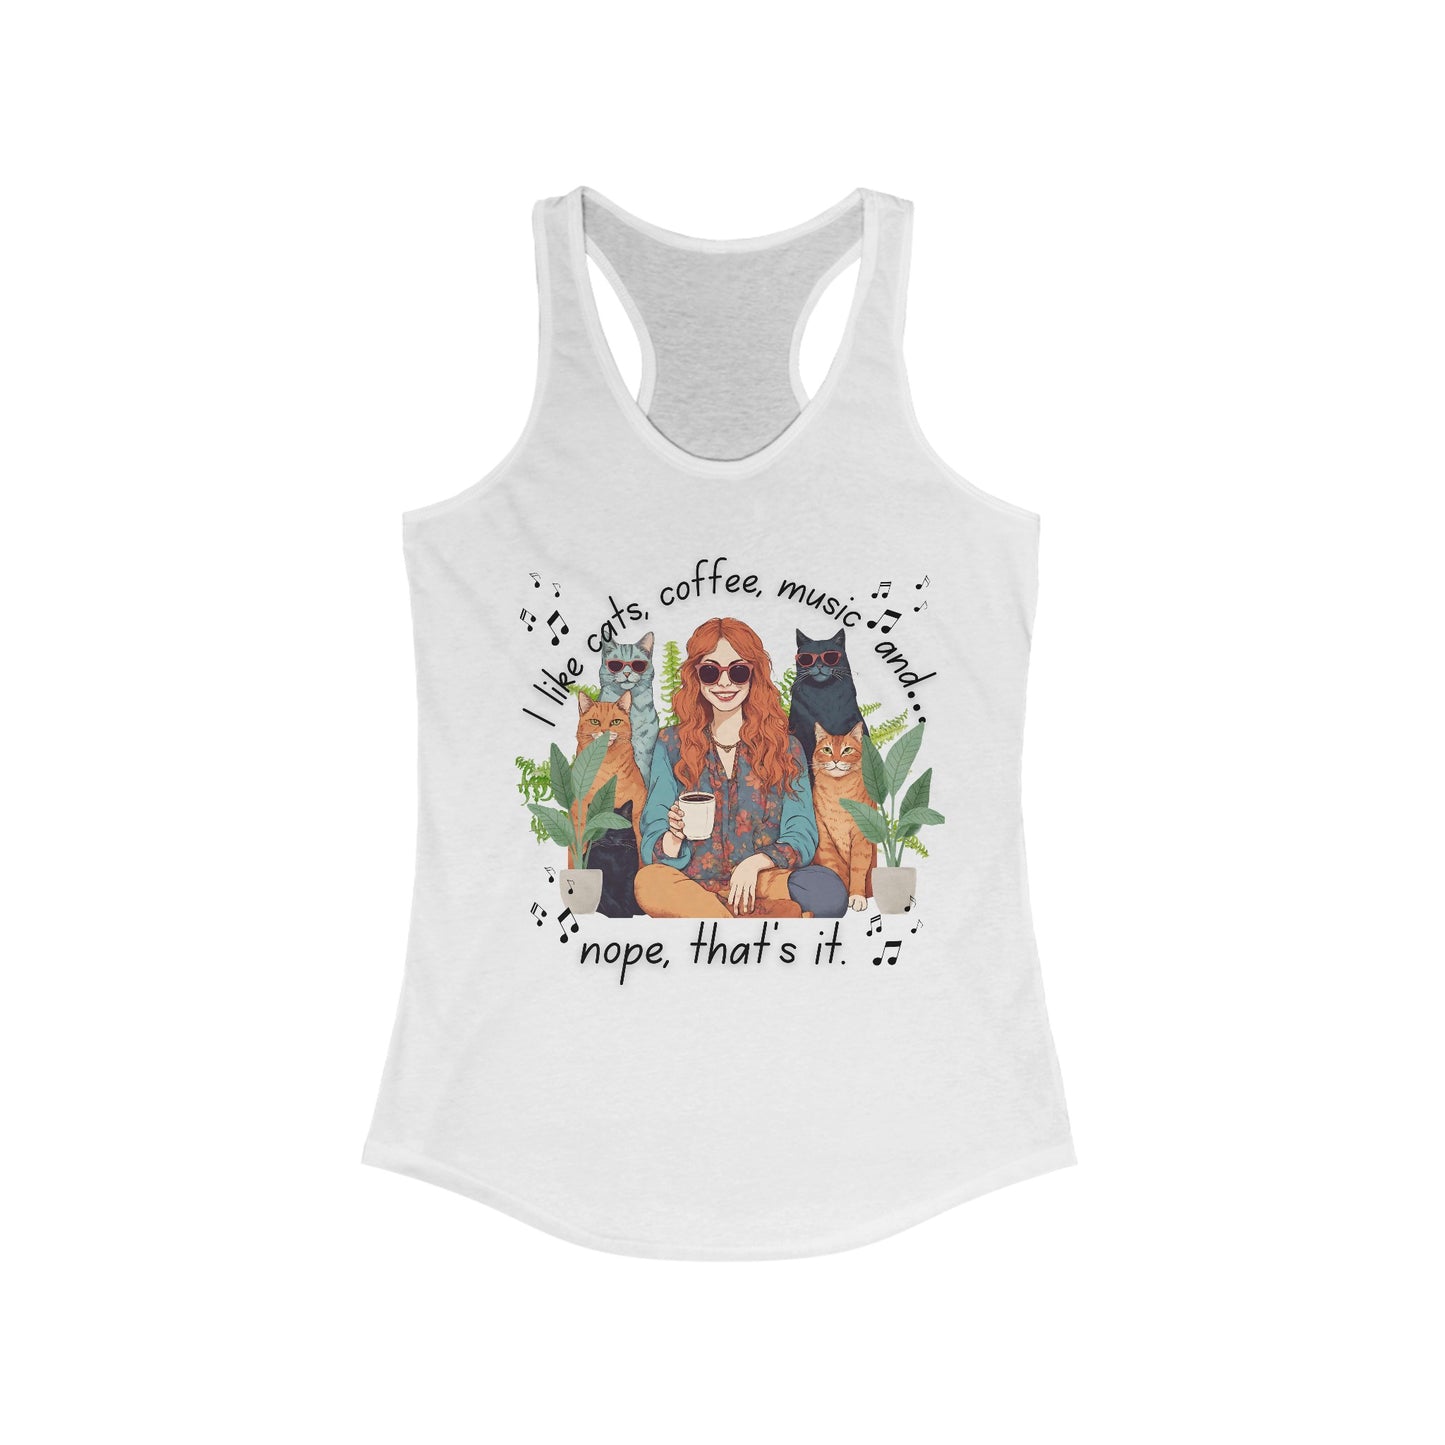 Cat Lady - Cats, music, plants and... 2 Women's Ideal Racerback Tank